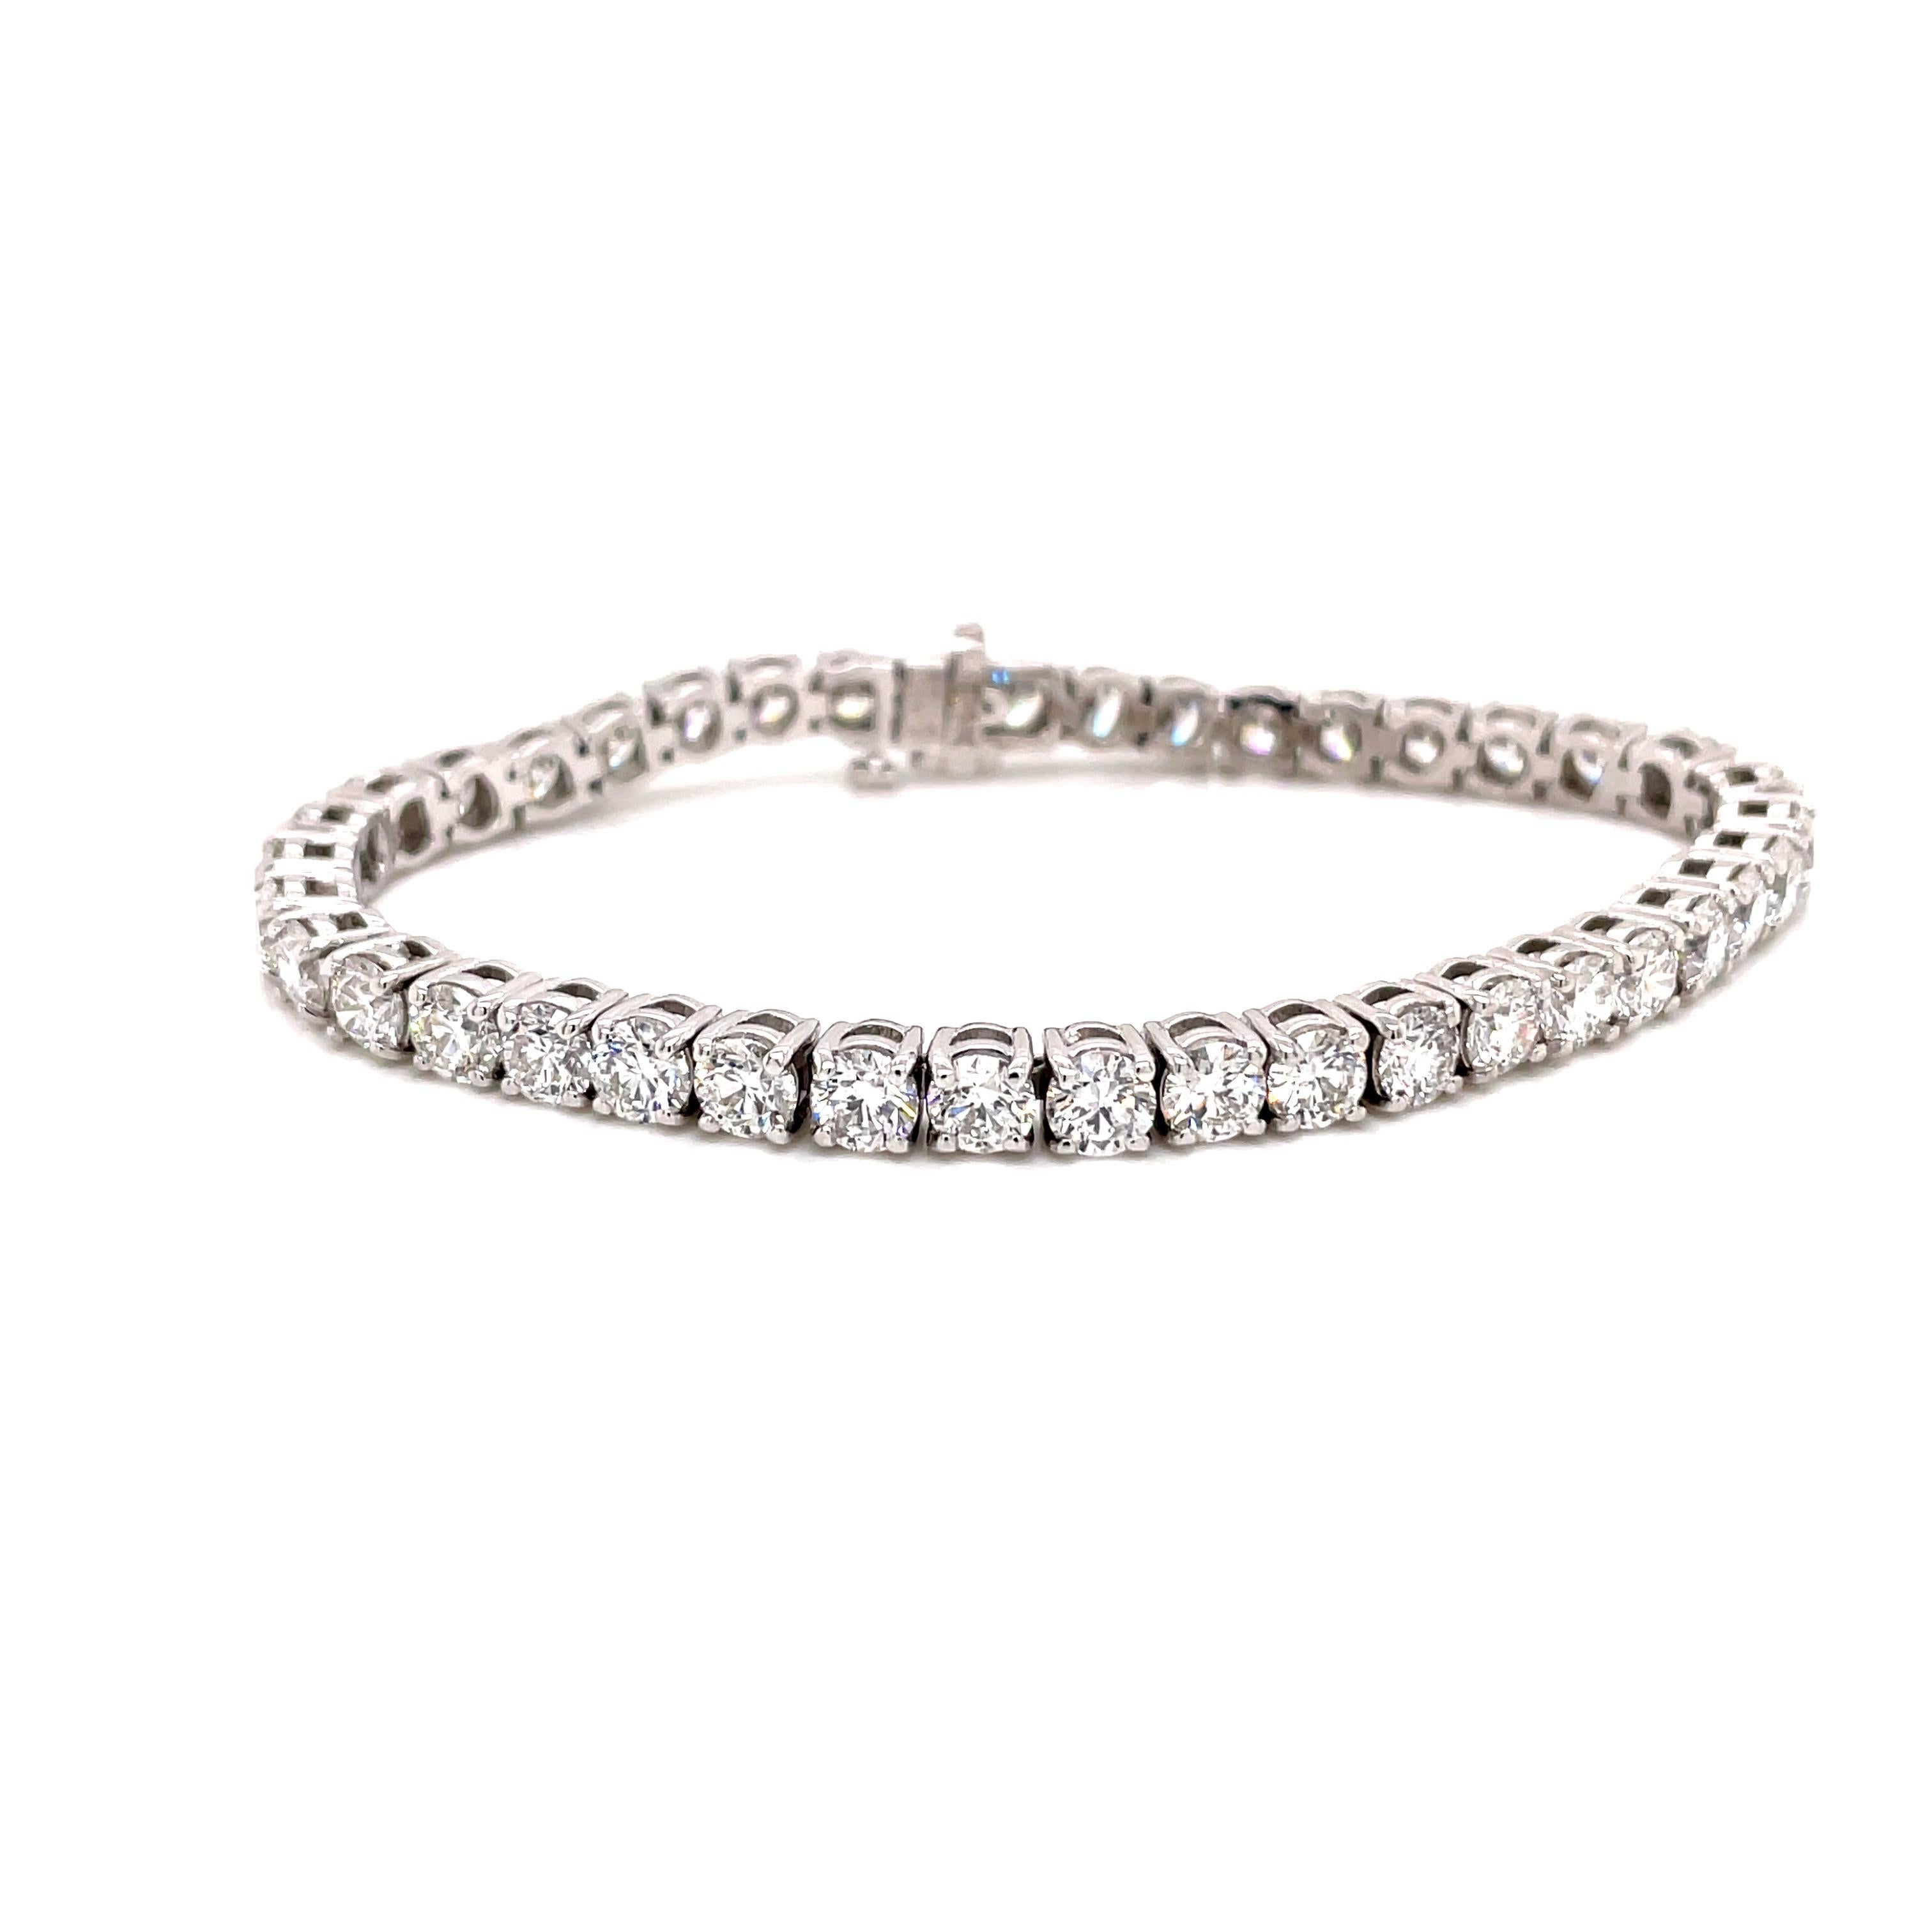 14KW Diamond Tennis Bracelet 13.27ct GIA Certified - There are a total of 40 round brilliant diamonds weighing 13.27ct with an average weight of .33ct each. The diamonds are all GIA certified ranging in quality from E - G color and VS2 - SI2